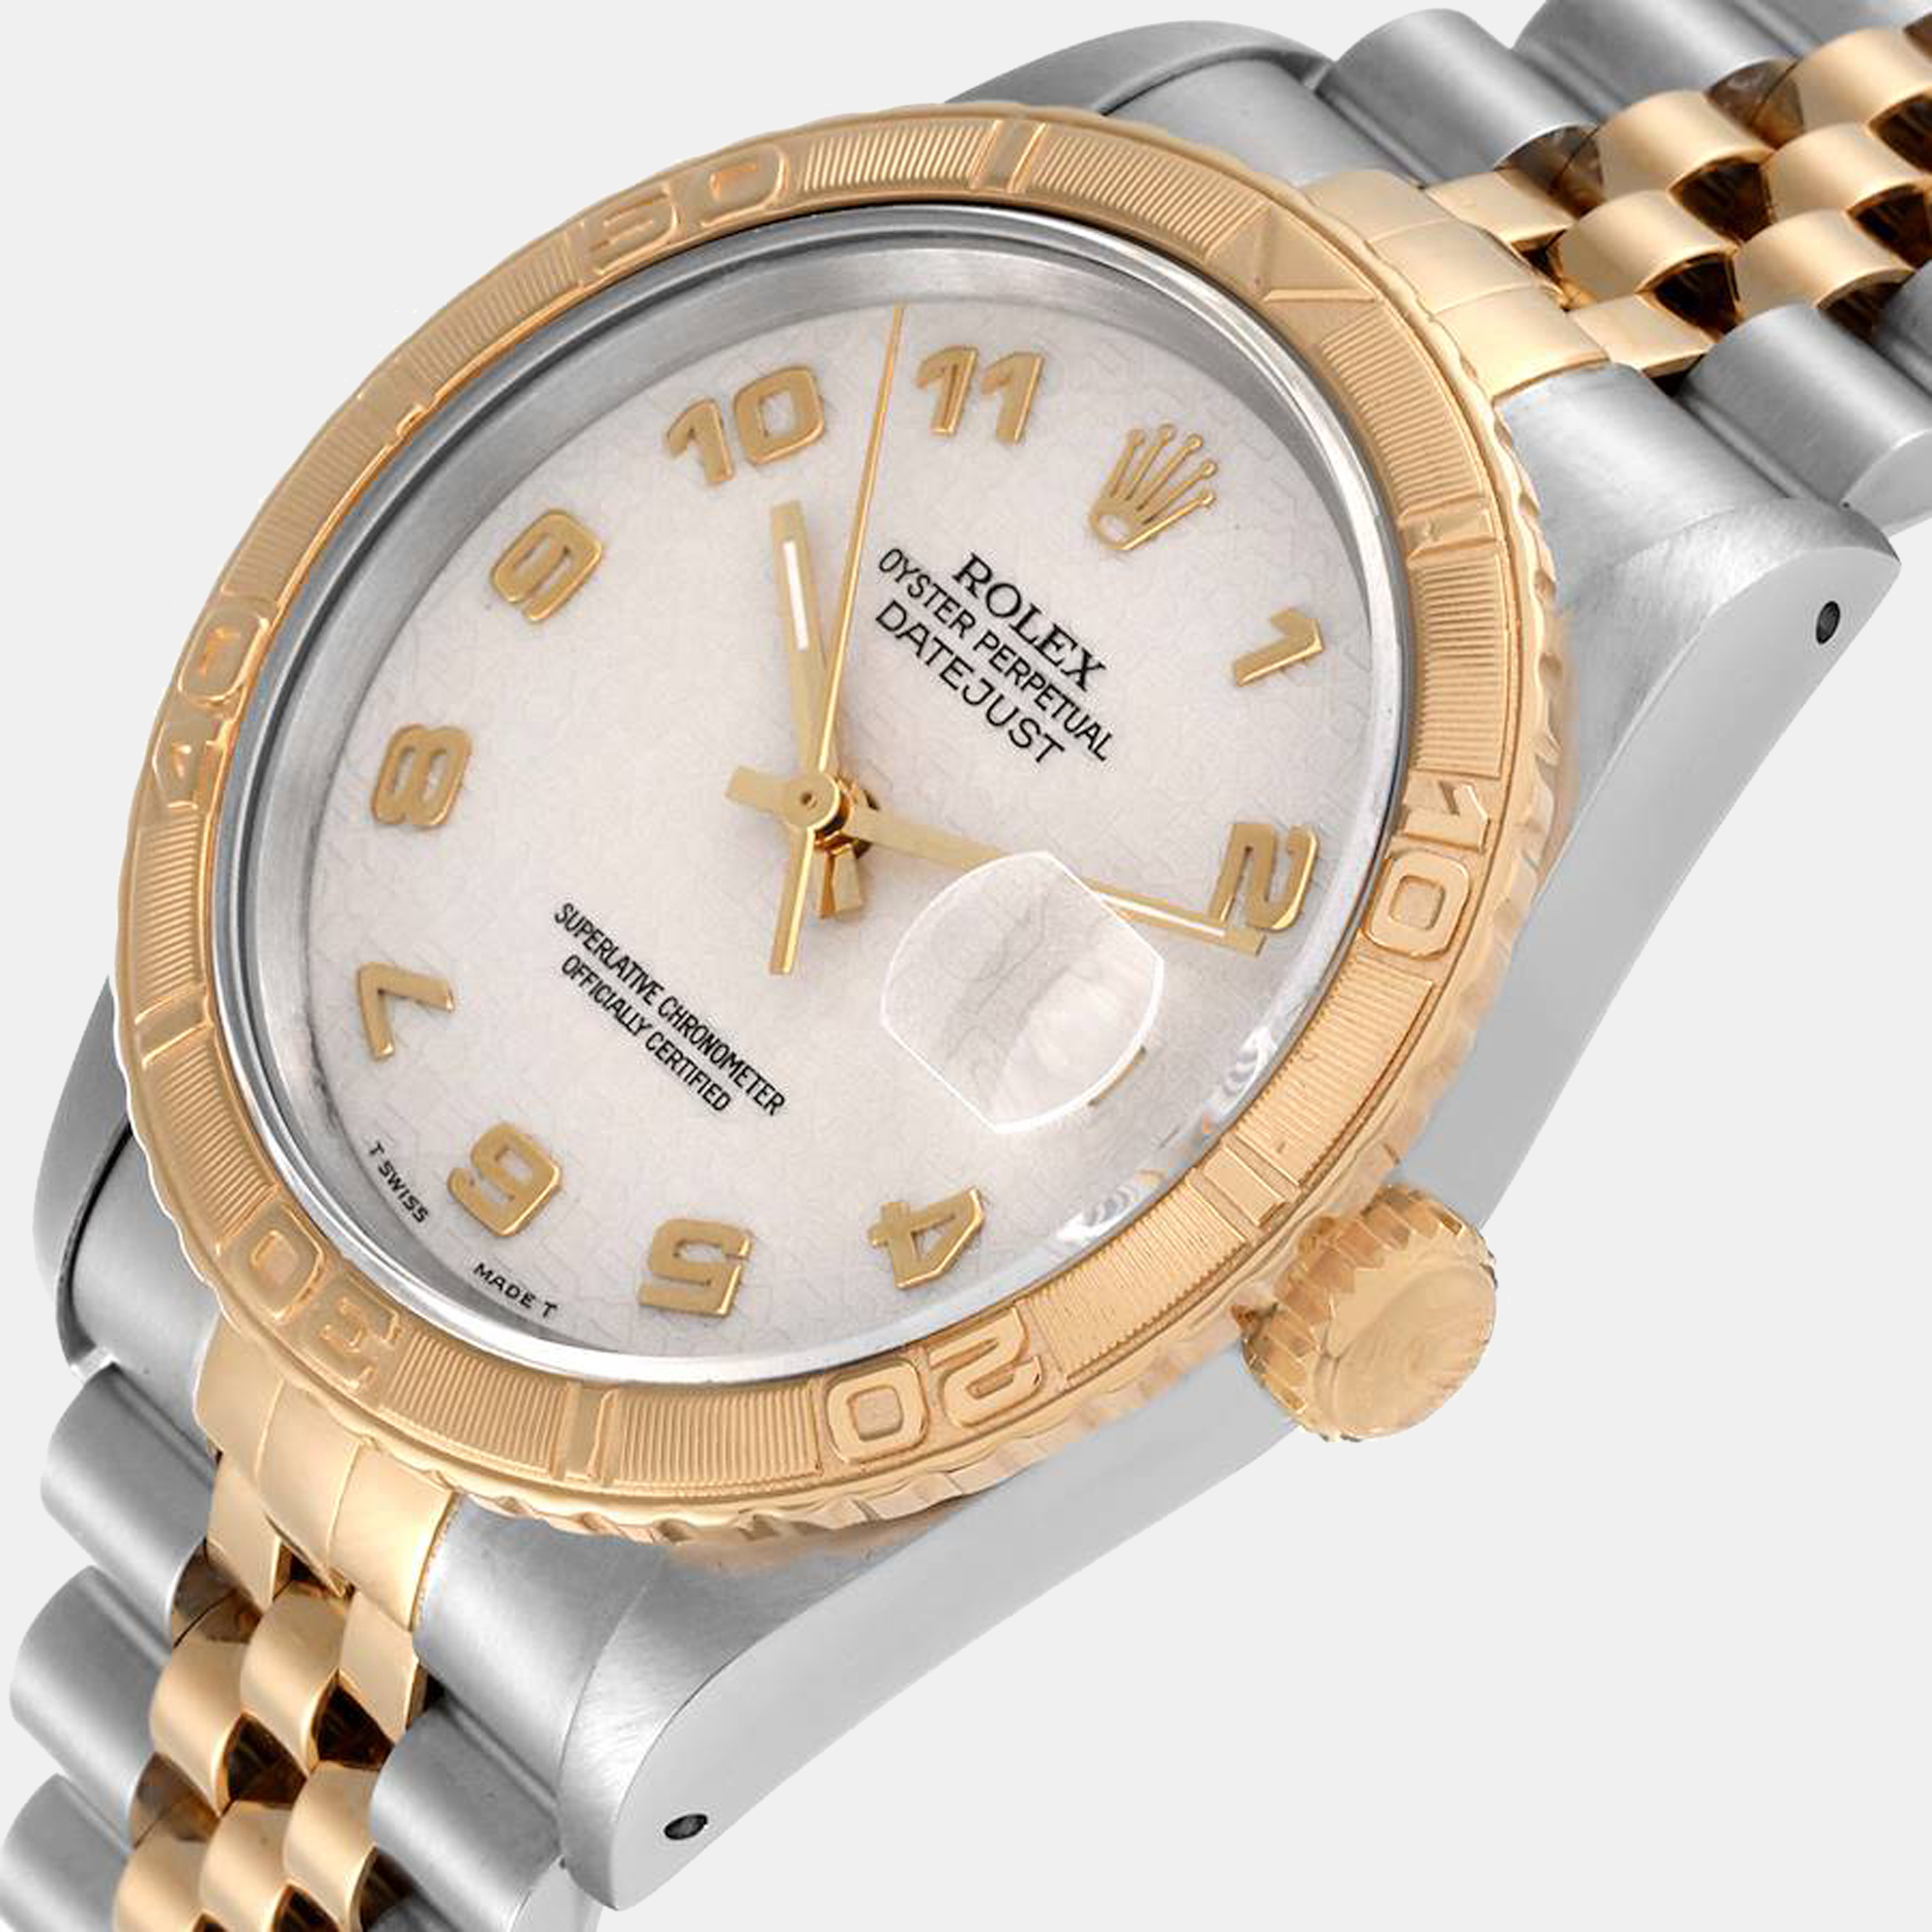 

Rolex Silver 18K Yellow Gold And Stainless Steel Turnograph Datejust 16263 Men's Wristwatch 36 mm